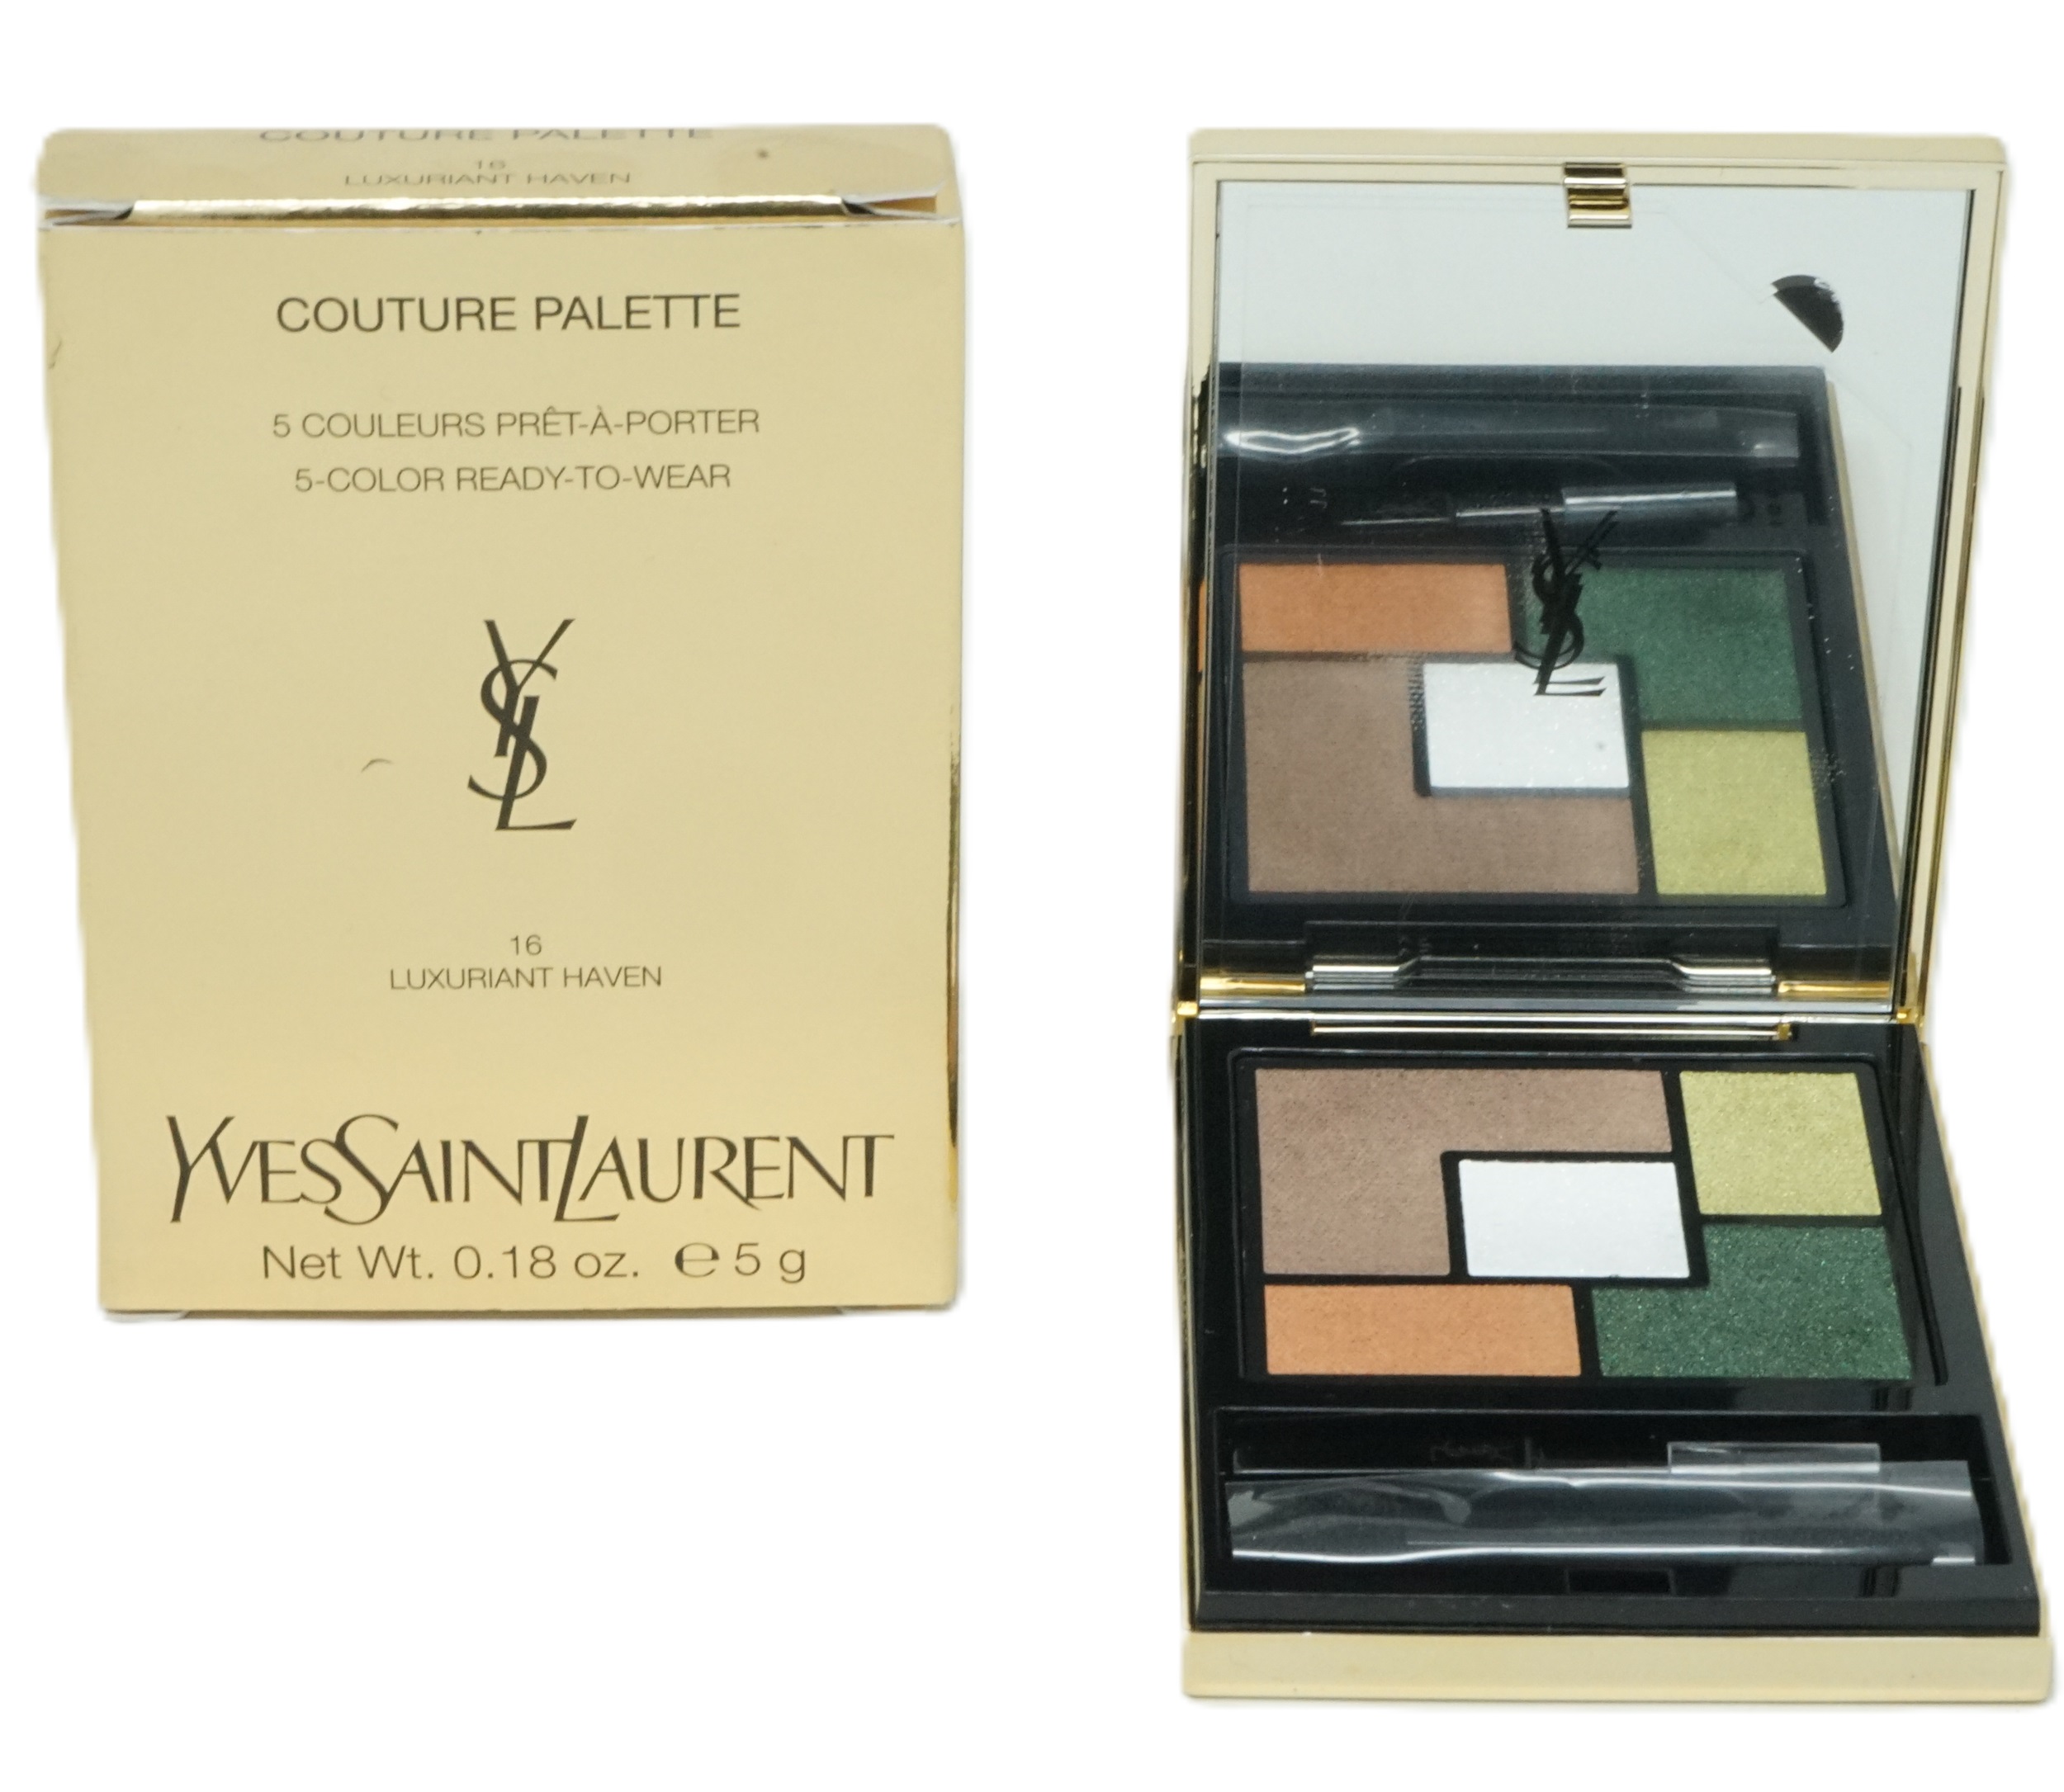 Yves Saint Laurent Couture Palette 5-Color ready-to-wear 16 Luxuriant Haven 5g